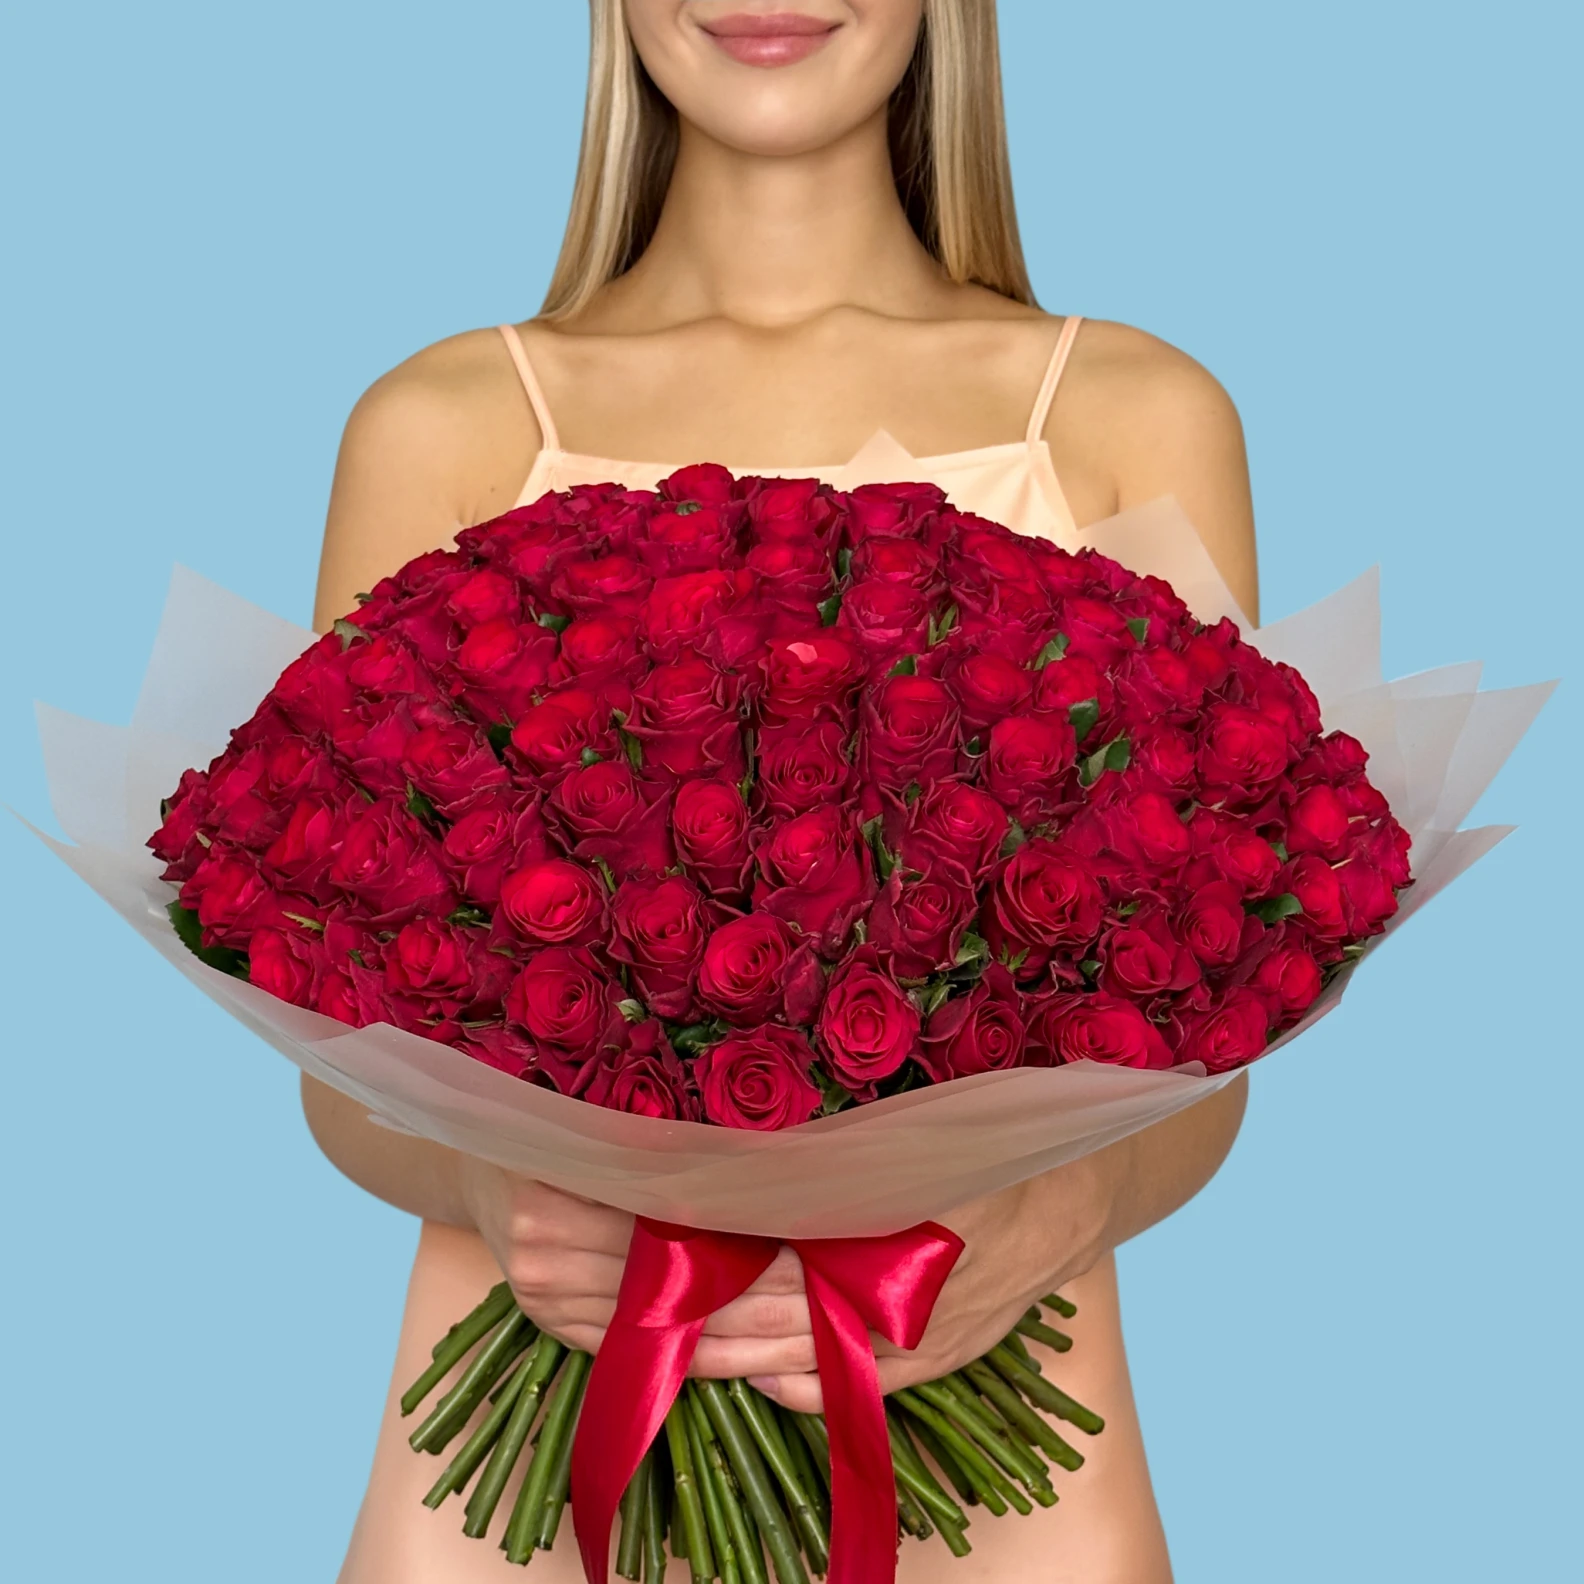 150 Red Roses from Kenya - image №1